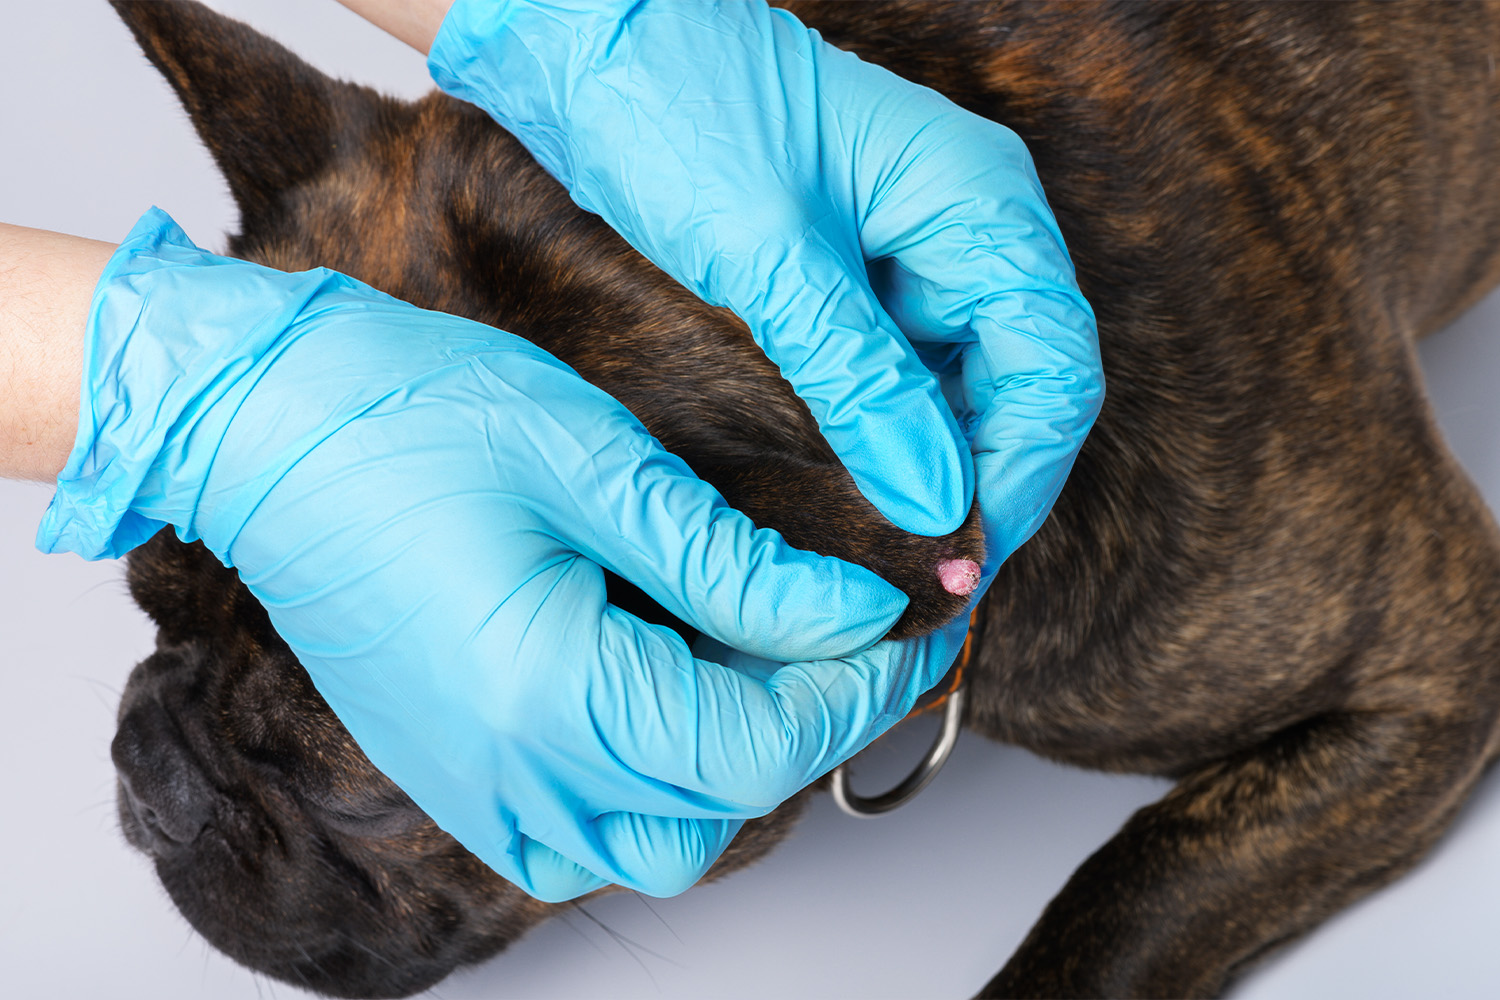 Skin Cancer or Wart? How To Tell the Difference on Your Dog